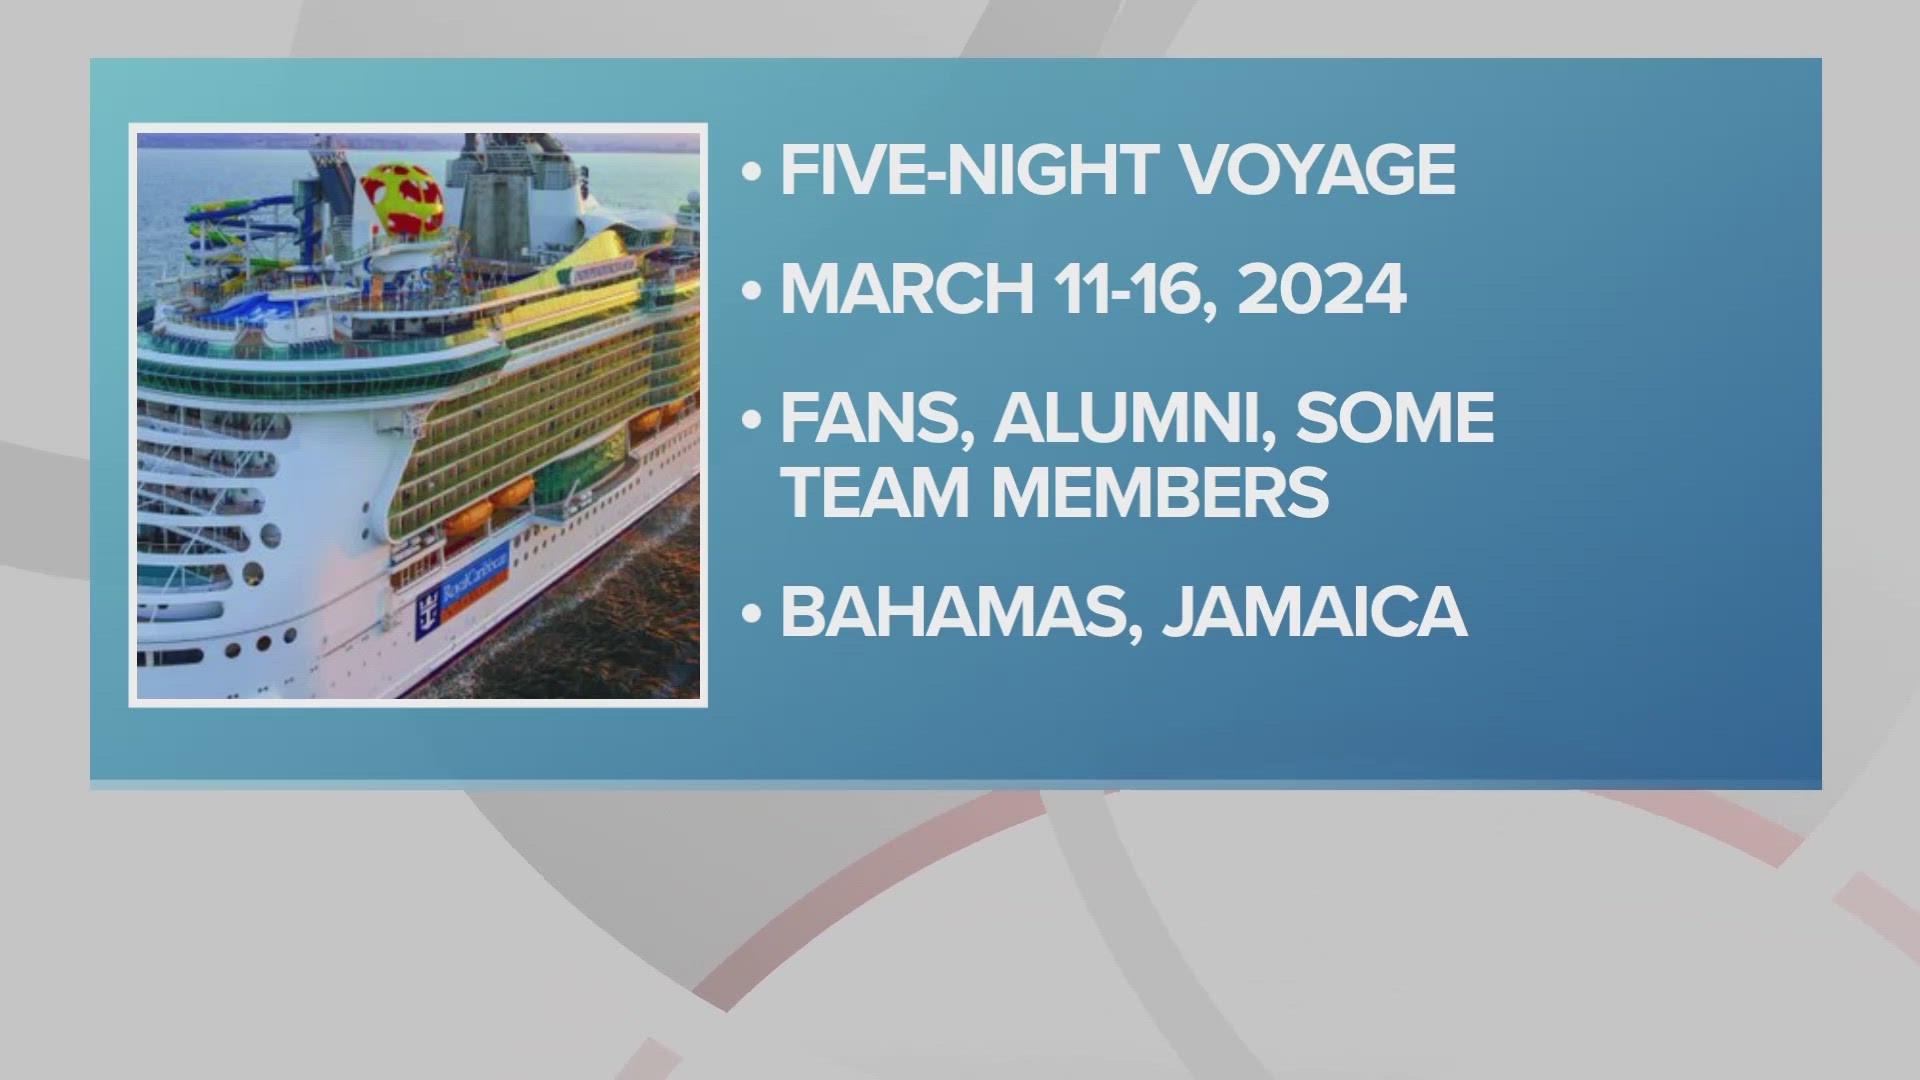 The cruise will depart on March 11 from the Port of Miami and will visit Nassau, Bahamas and Falmouth Jamaica before returning on March 16.